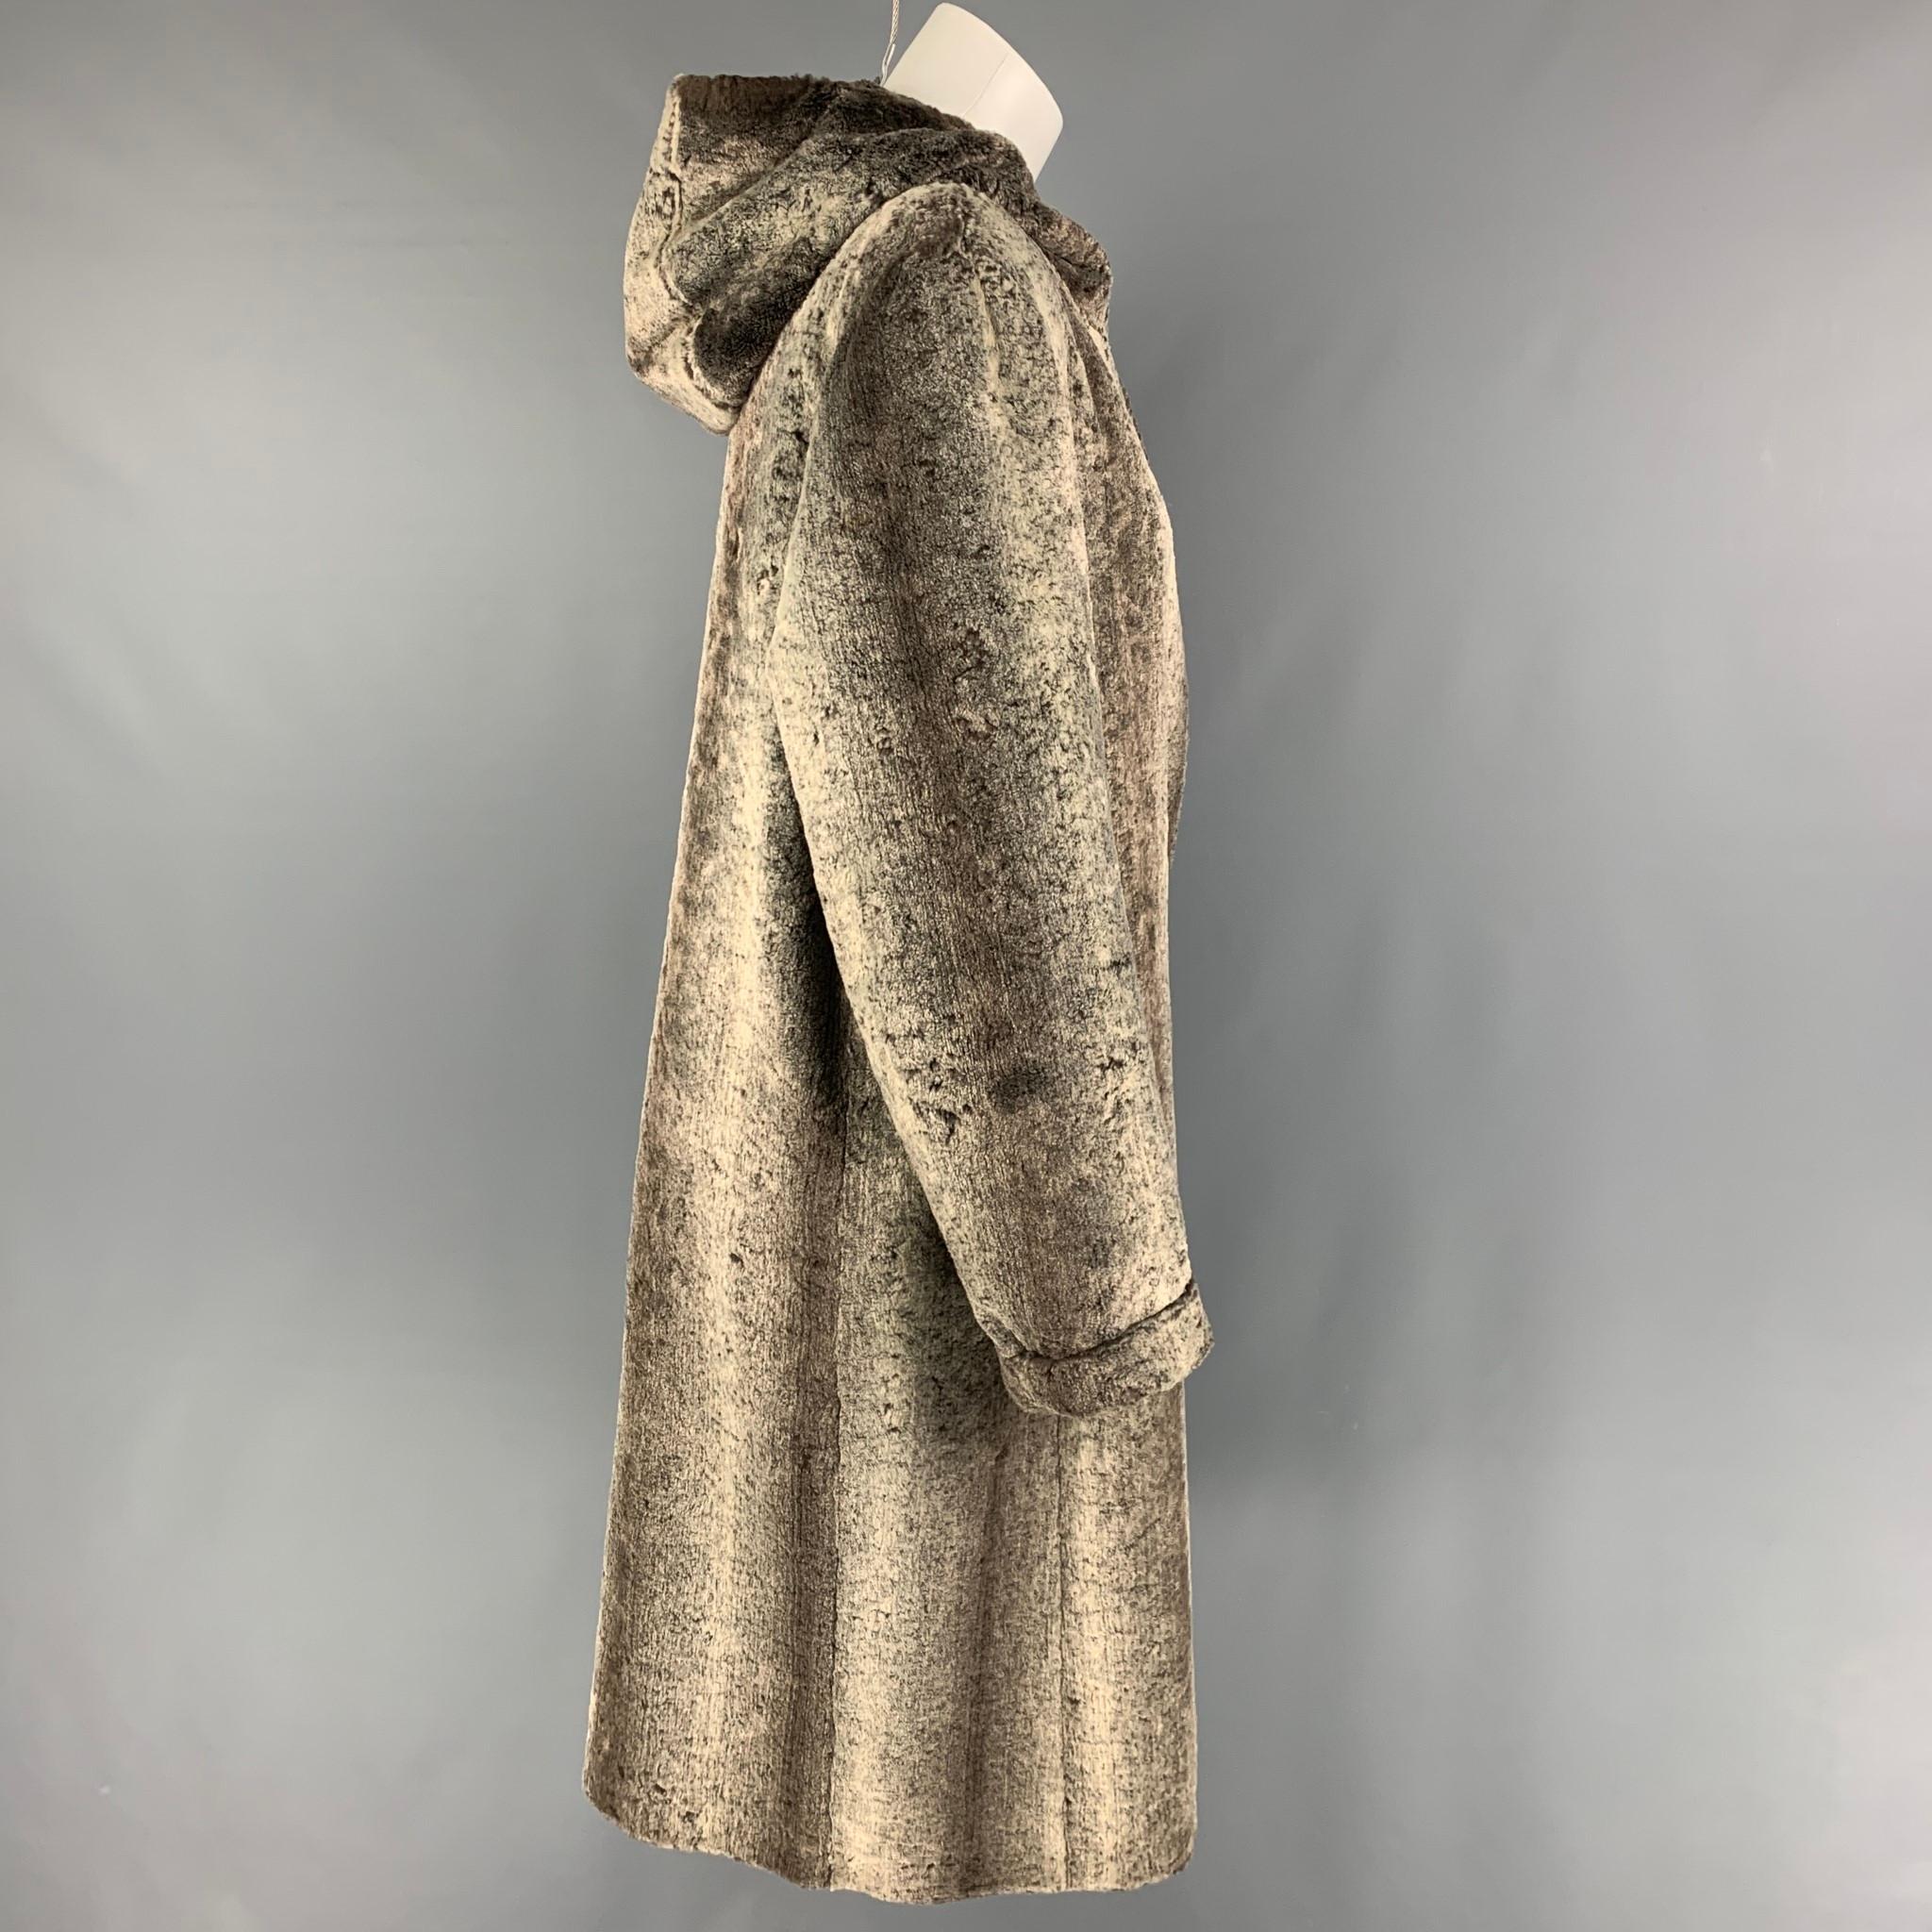 GIANFRANCO FERRE coat comes in a taupe viscose faux fur featuring a hooded style, slit pockets, and a hook & loop closure. 

Good Pre-Owned Condition. Missing a hook & loop.
Marked: 42

Measurements:

Shoulder: 17 in.
Bust: 41 in.
Sleeve: 25.5